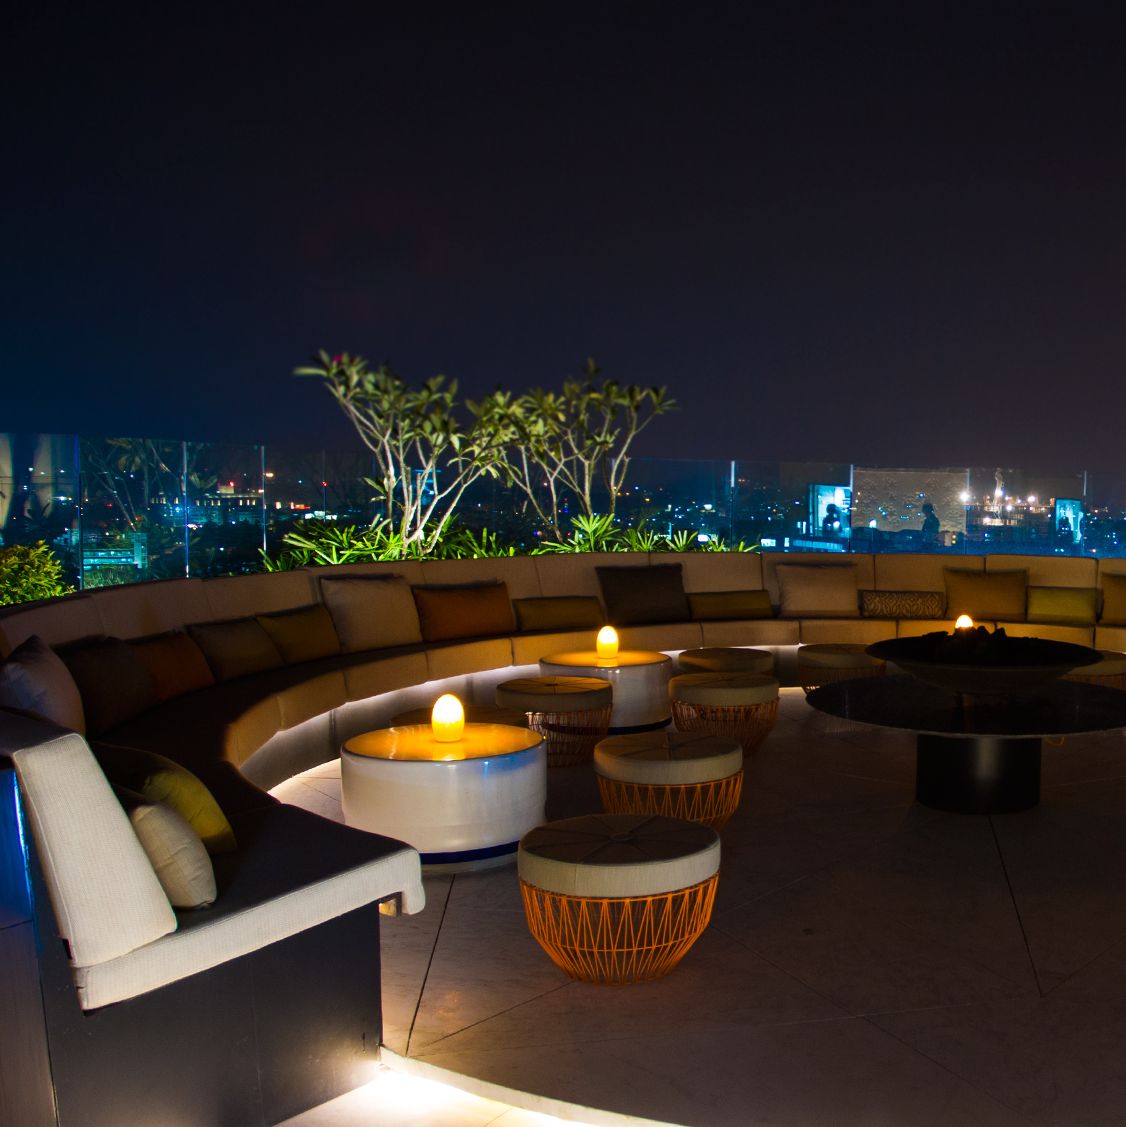 Circular rooftop bar with banquette seating, small round coffee tables and impressive skyline city views at night